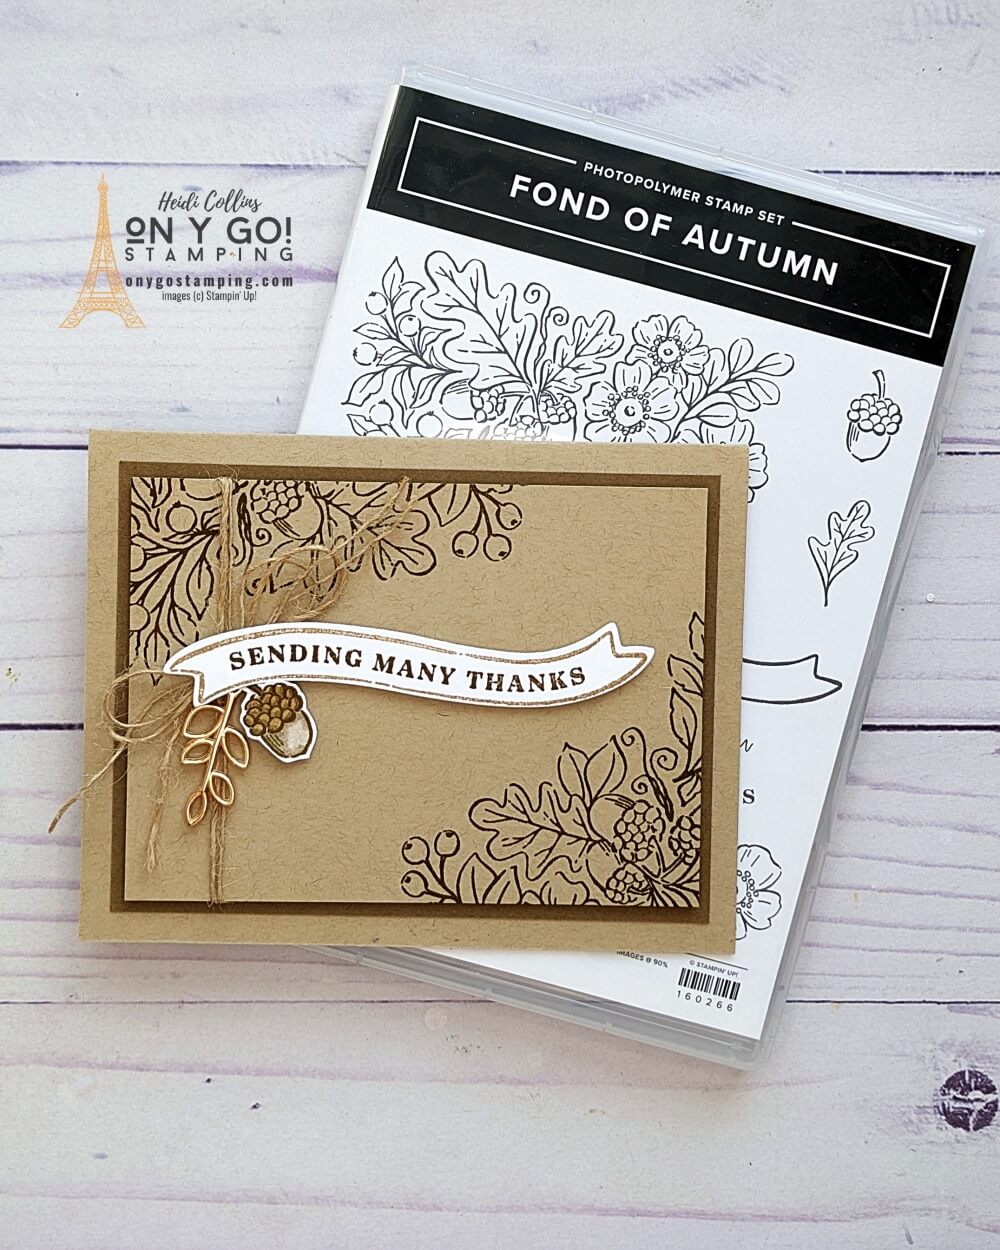 Make a quick and easy thank you card for fall with the Fond of Autumn stamp set and Autumn Bouquet dies from Stampin' Up!